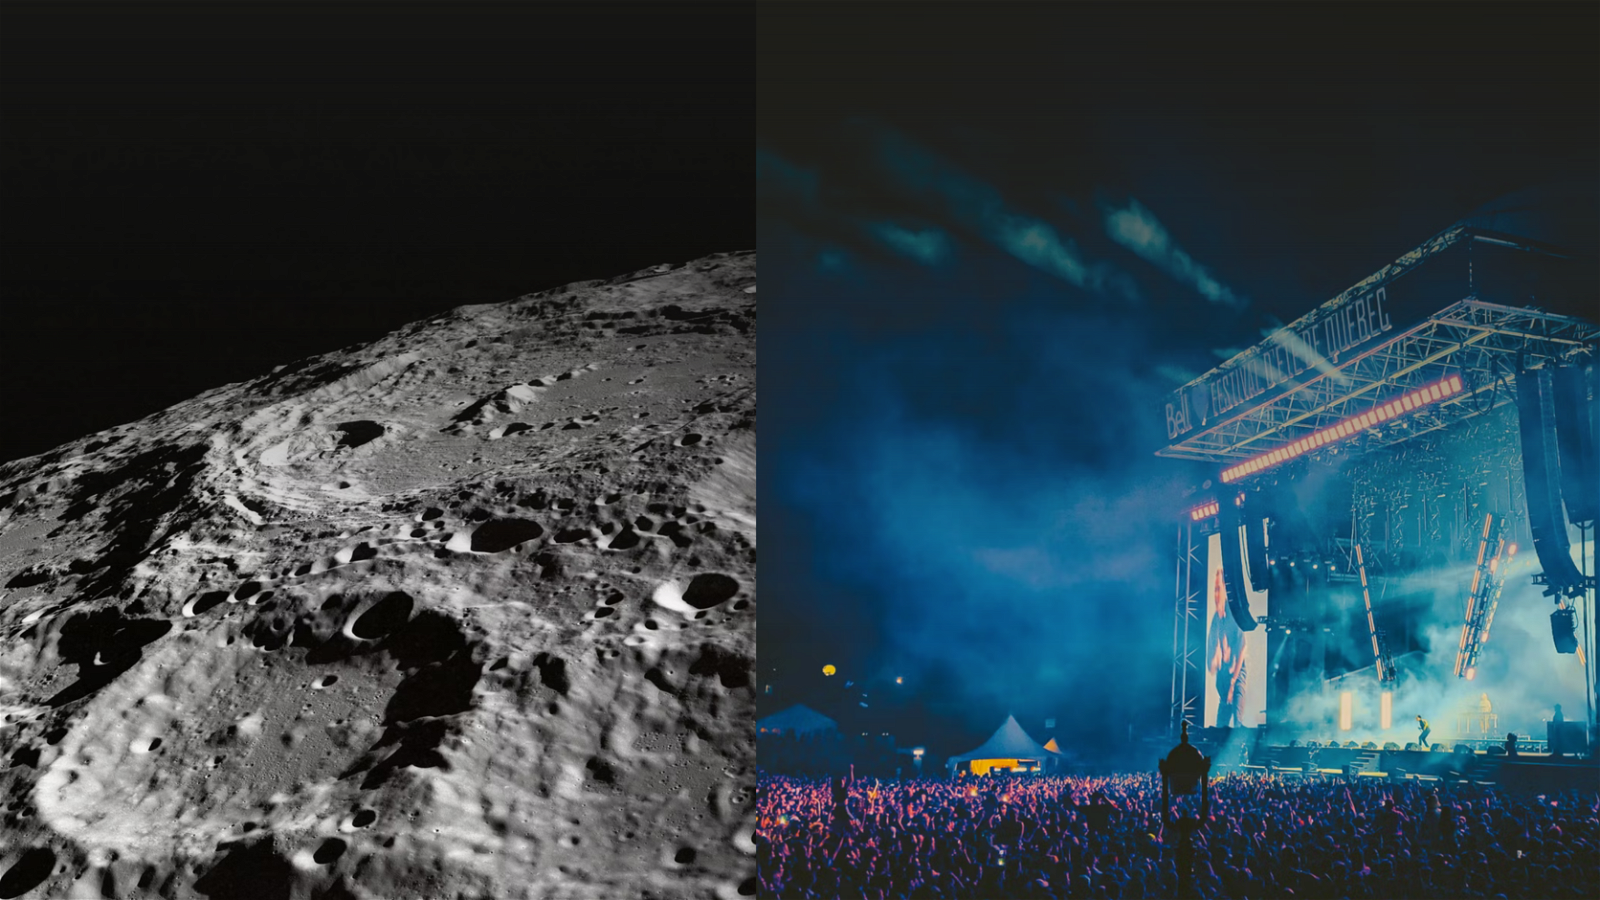 Weekly Highlights | From the promising mines on the moon to Coldplay’s alledged Greenwashing